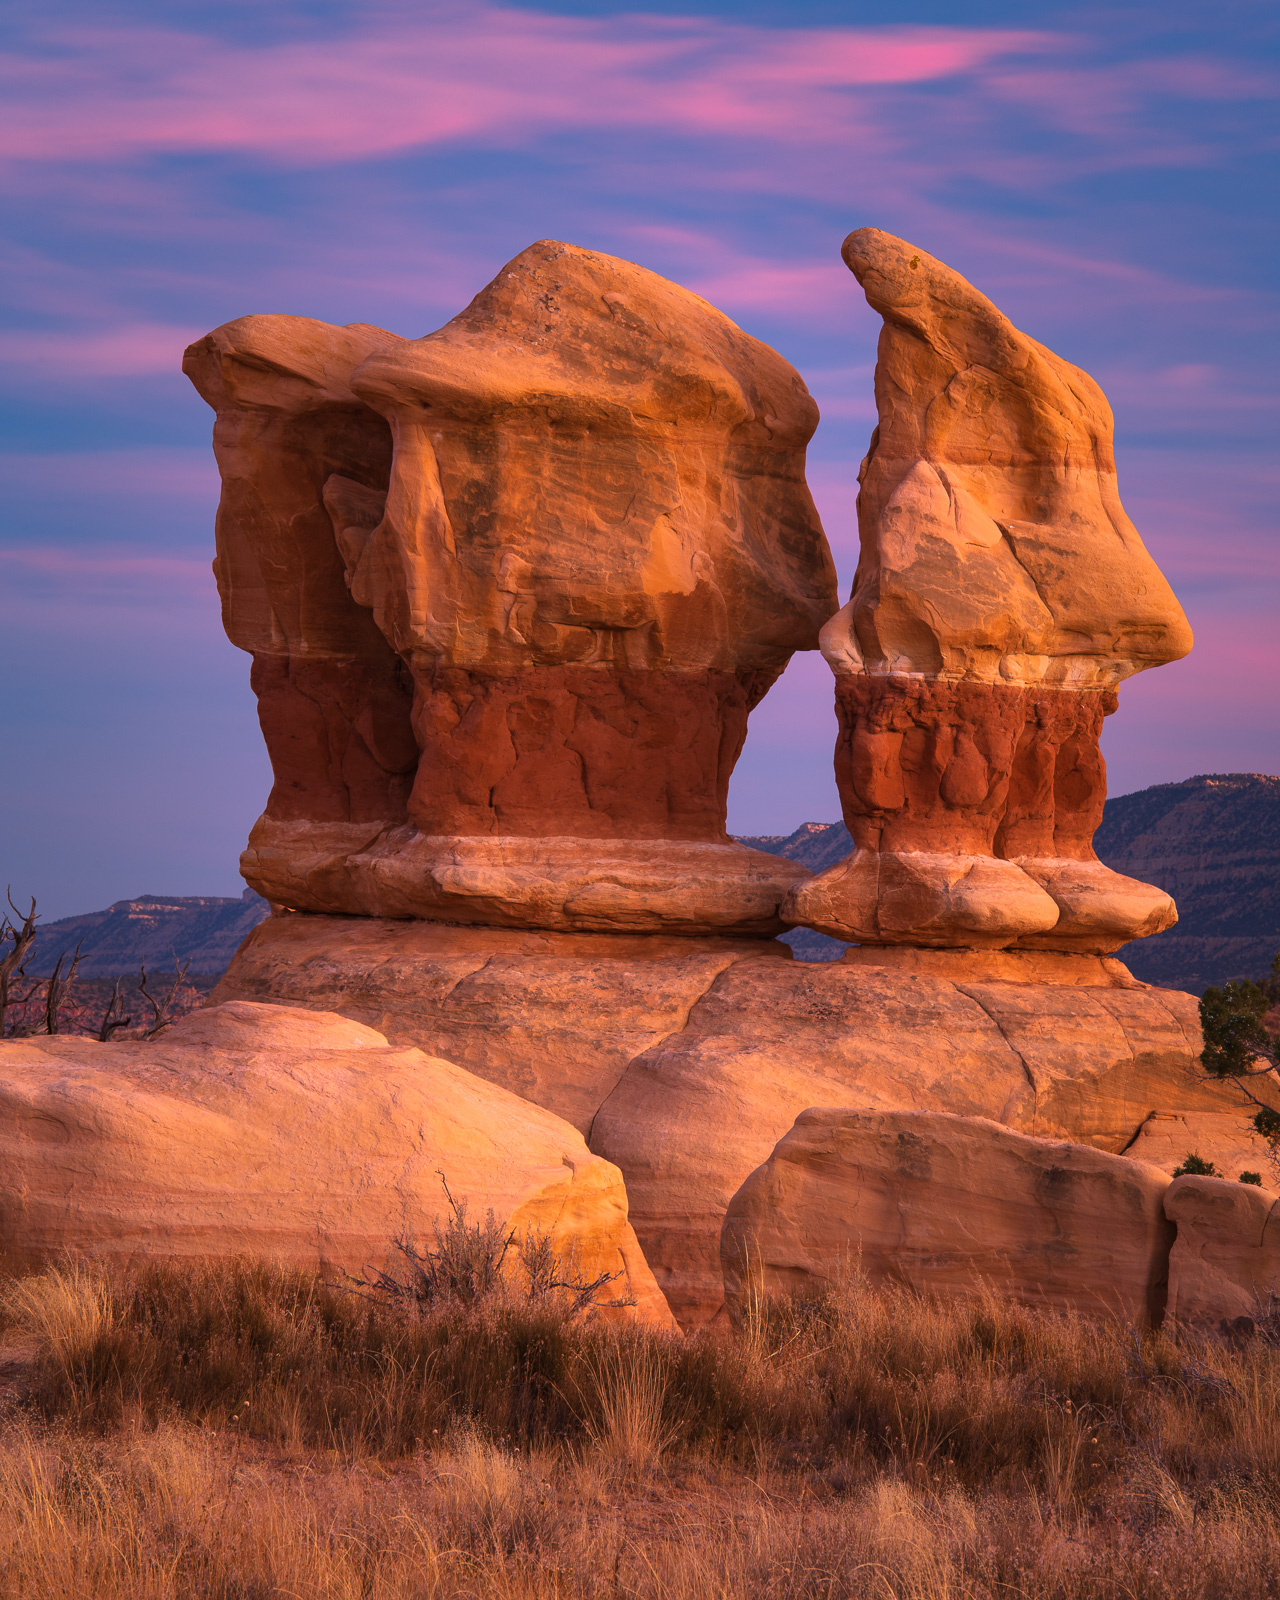 Sandstone formations at sunset in the Devils Garden of the Grand Staircase/Escalante National Monument, Utah.